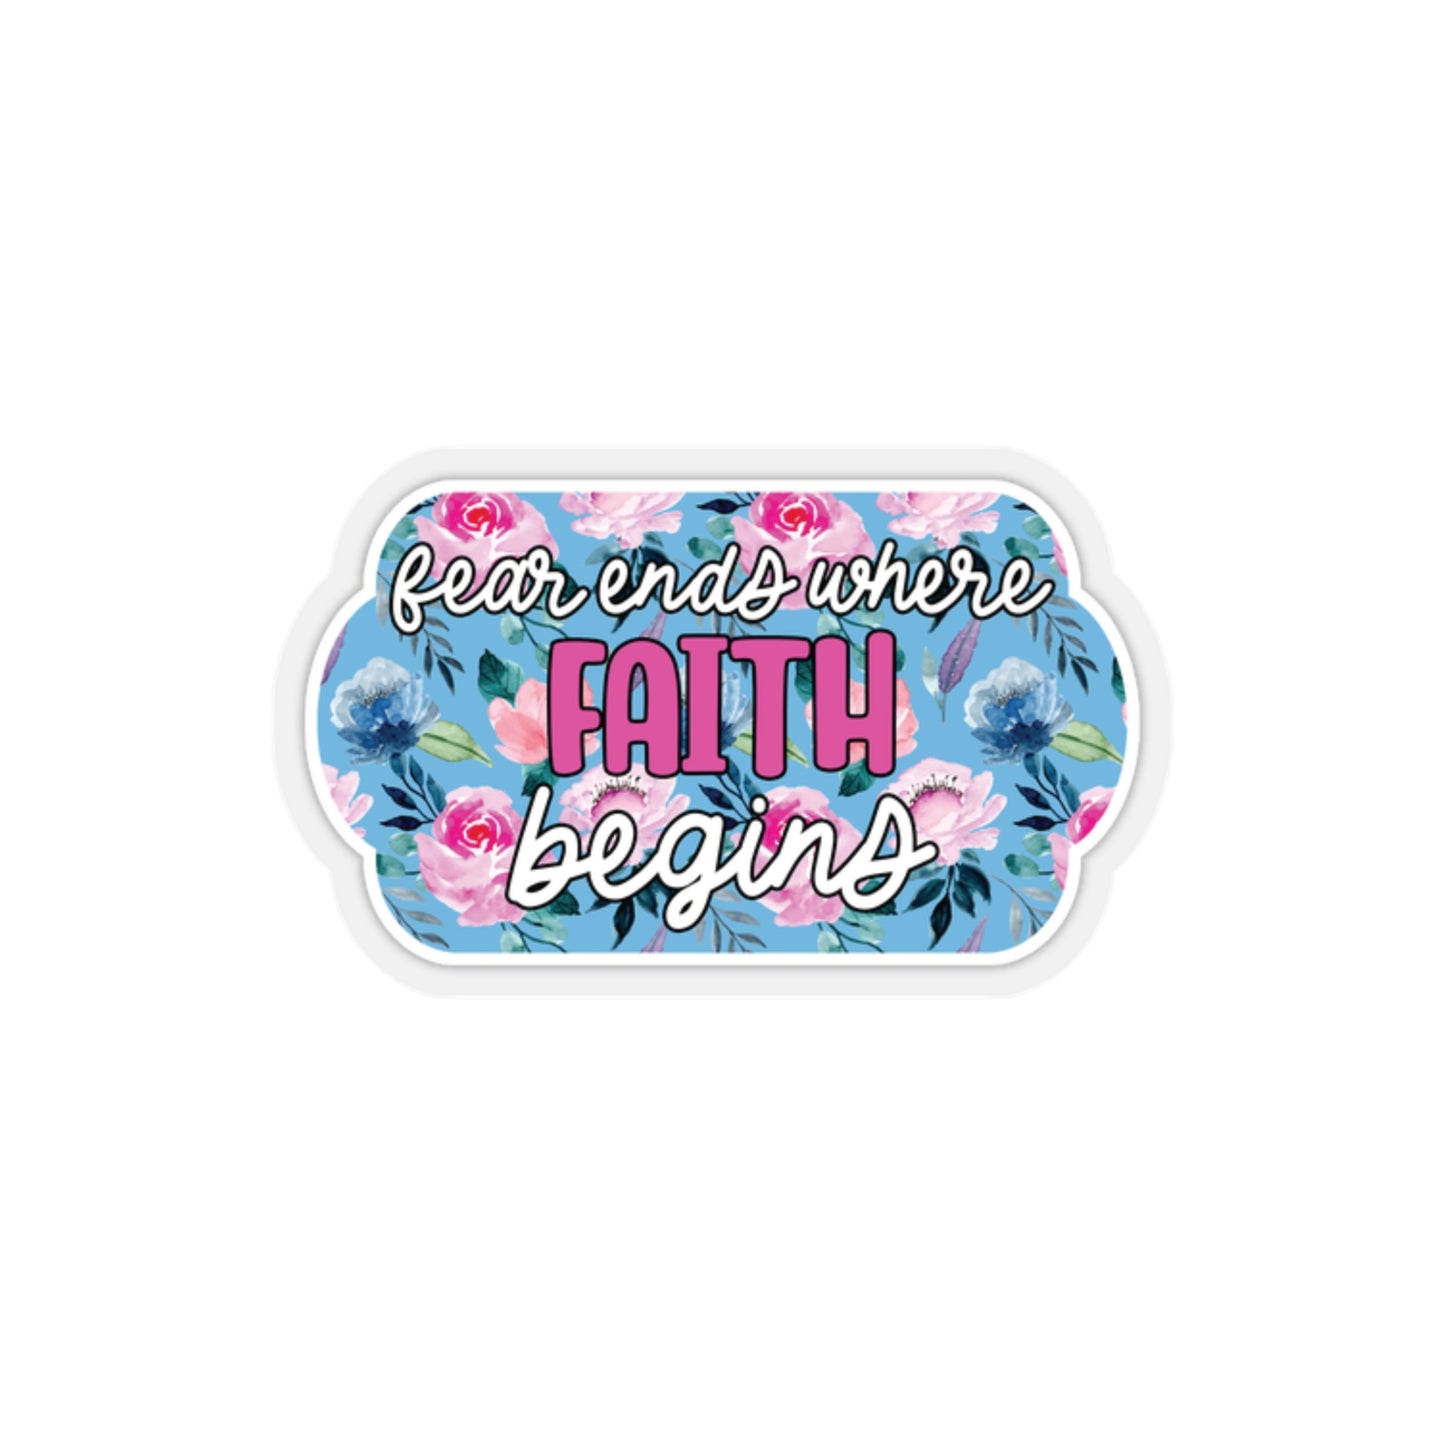 Fear Ends Where Faith Begins Sticker Bright Colors | Fun Stickers | Happy Stickers | Must Have Stickers | Laptop Stickers | Best Stickers